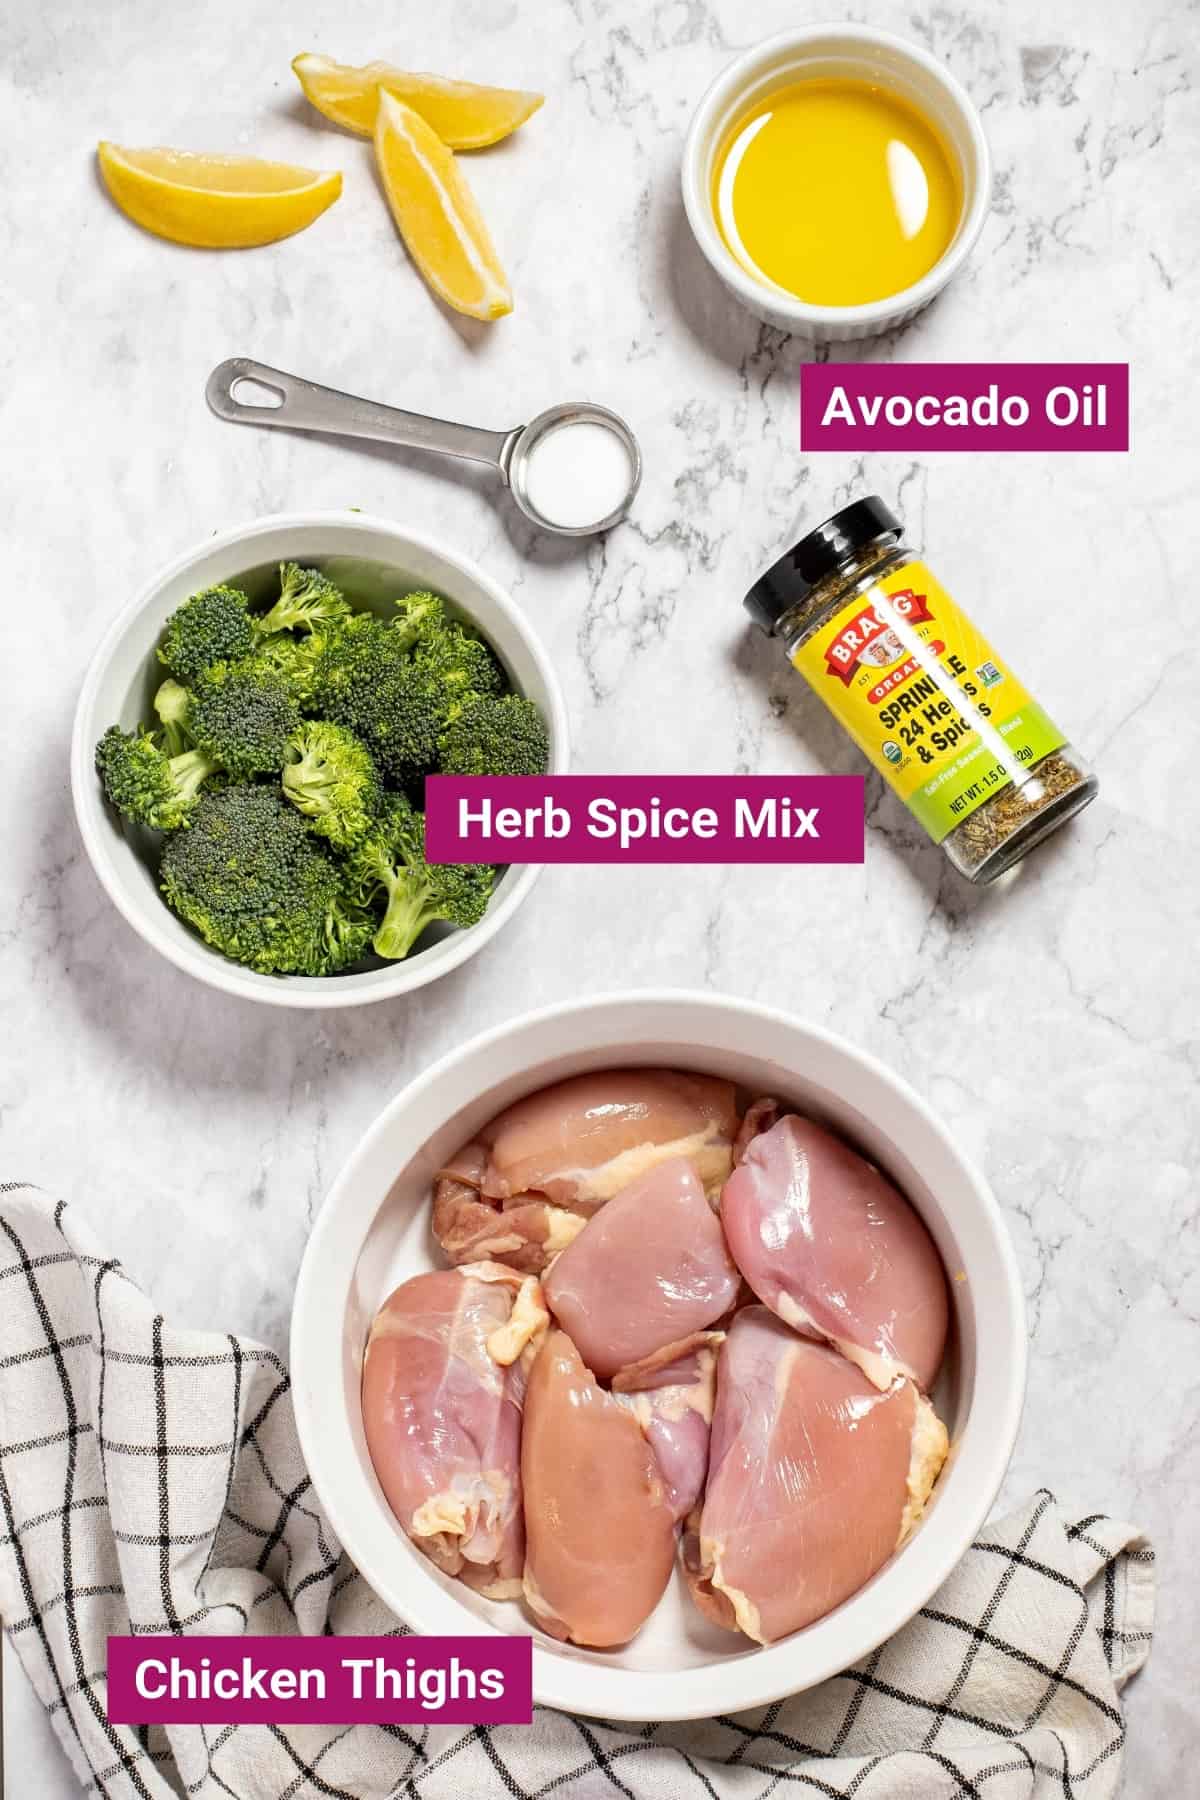 air fryer boneless chicken thigh ingredients like cooking oil, salt, 24 herb seasoning, and boneless skinless chicken thighs in separate bowls with a broccoli side dish